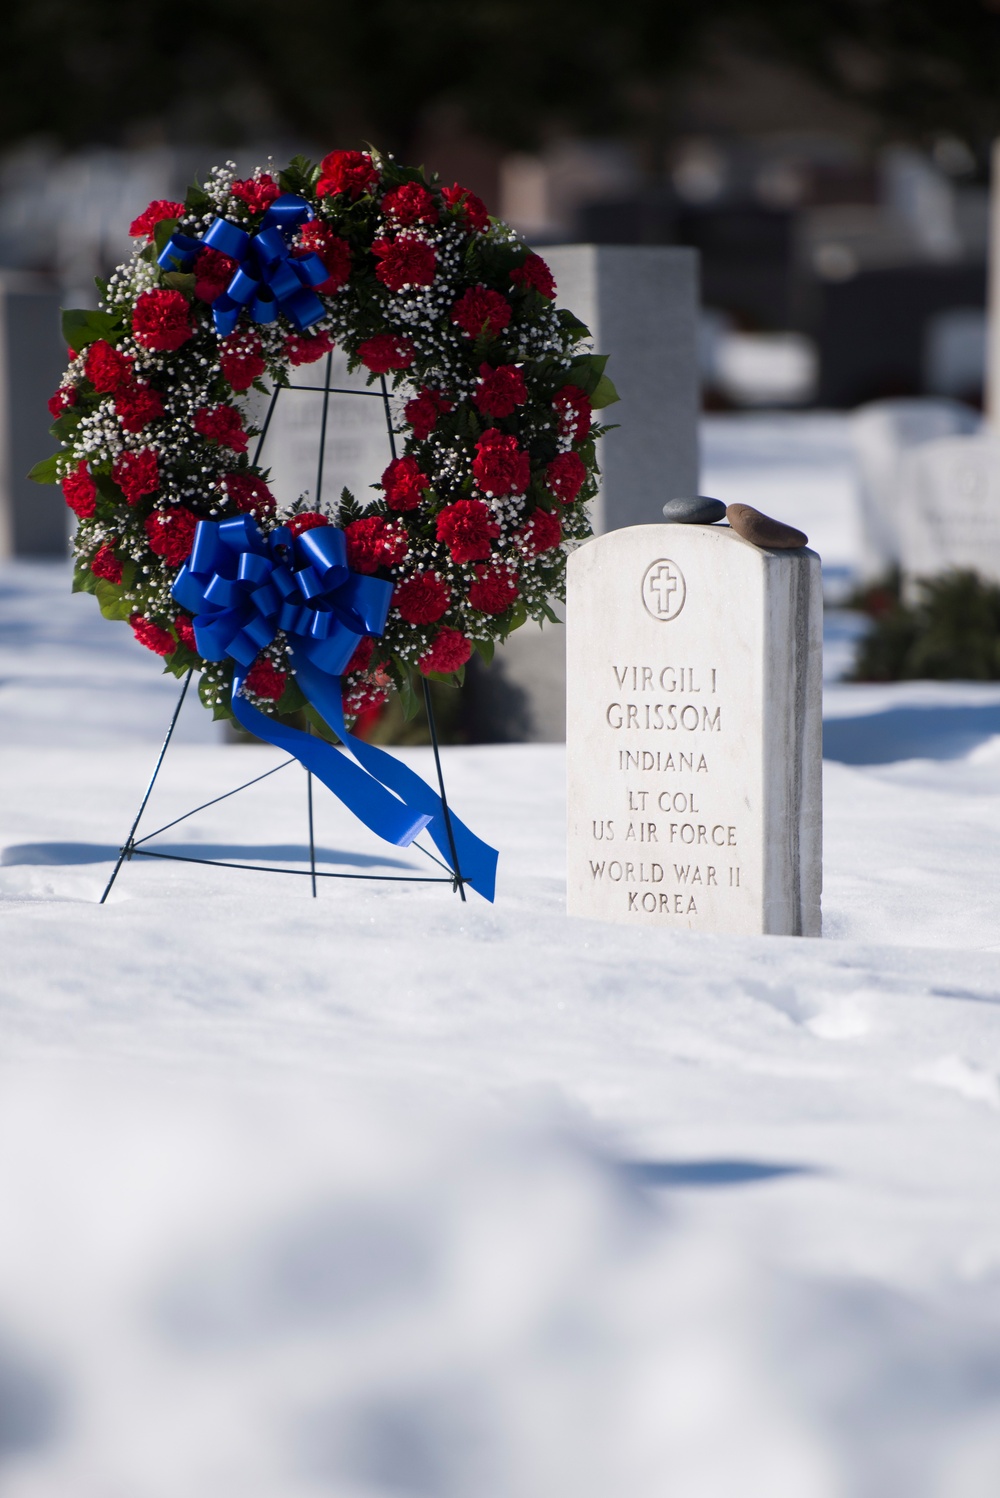 DVIDS Images NASA Day of Remembrance at Arlington National Cemetery